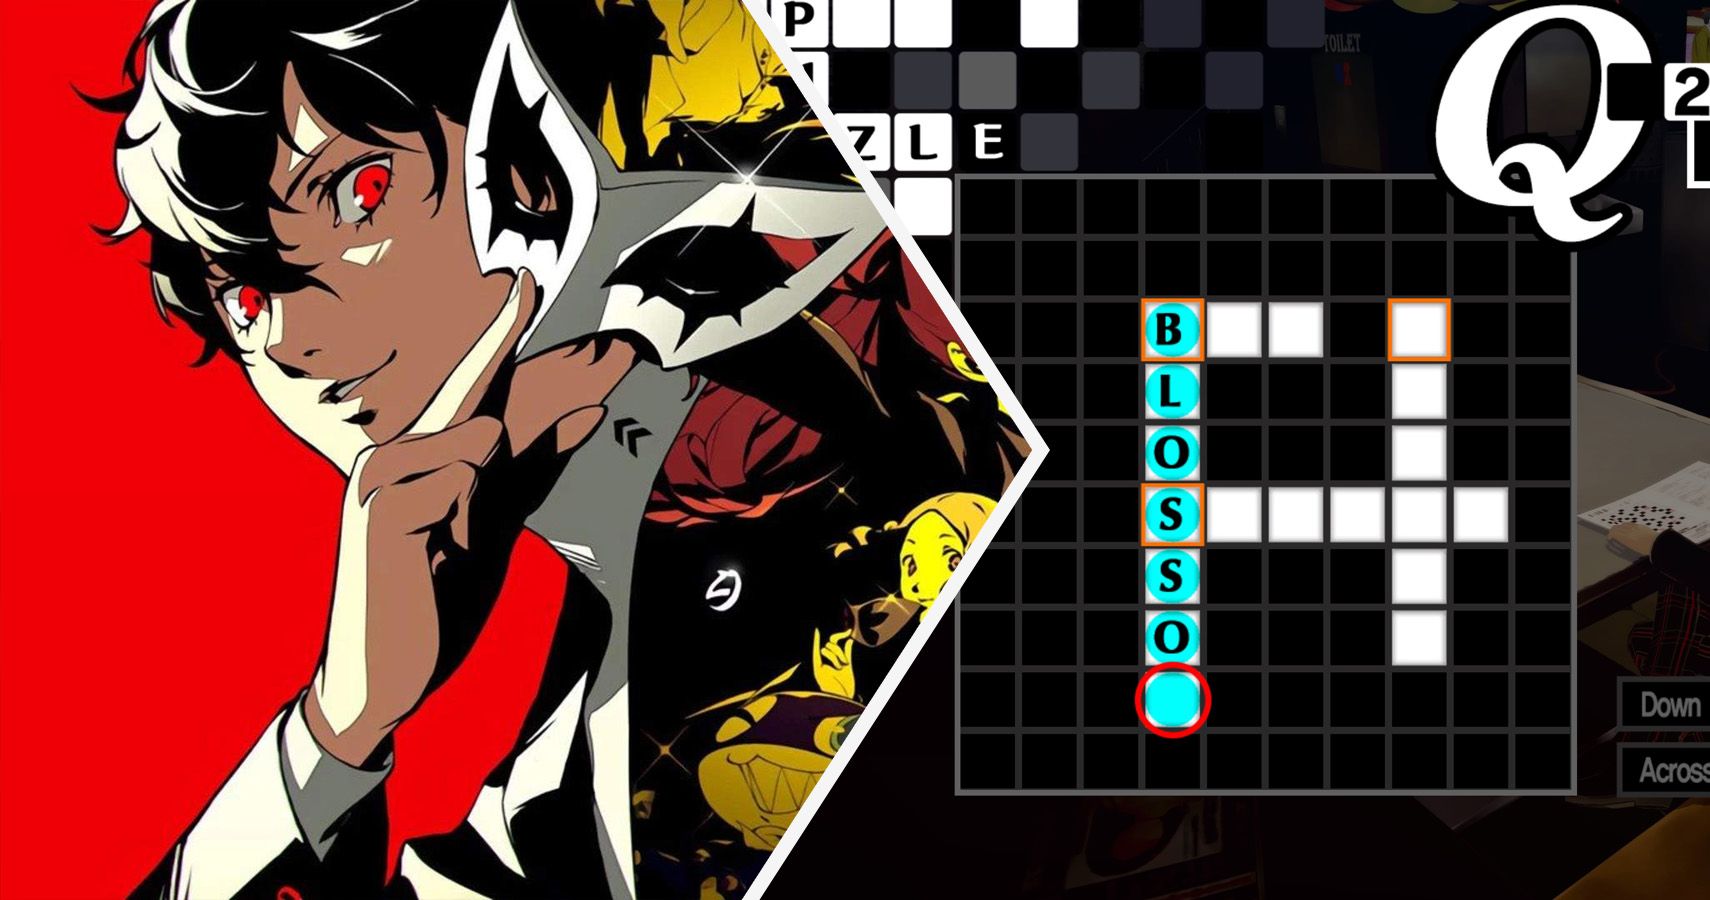 Persona 5 royal crossword puzzles scanryte